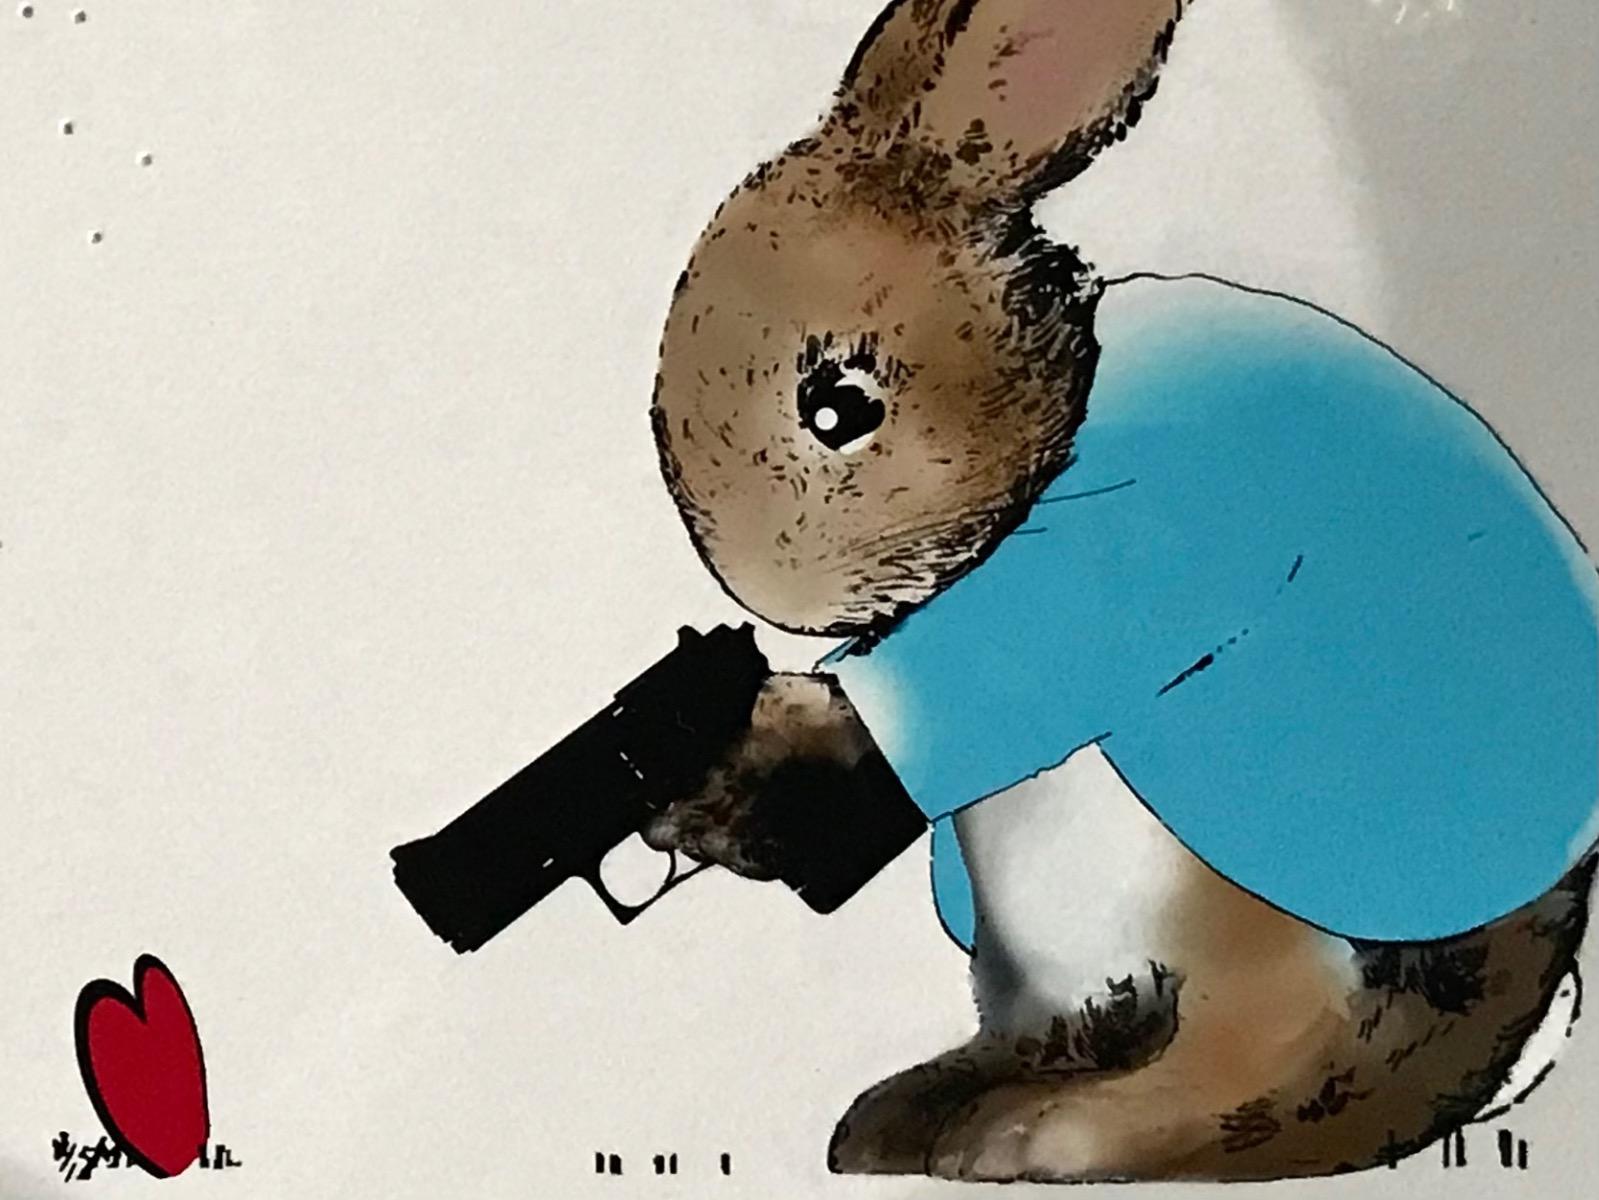 Rural Resistance series- Freeze! by Harry Bunce consists of blue red and brown tones that display a bunny holding a gun pointed at a red heart, wiht the gunshots in the sheet in the background.

Additional information:
Mixed media (archival print